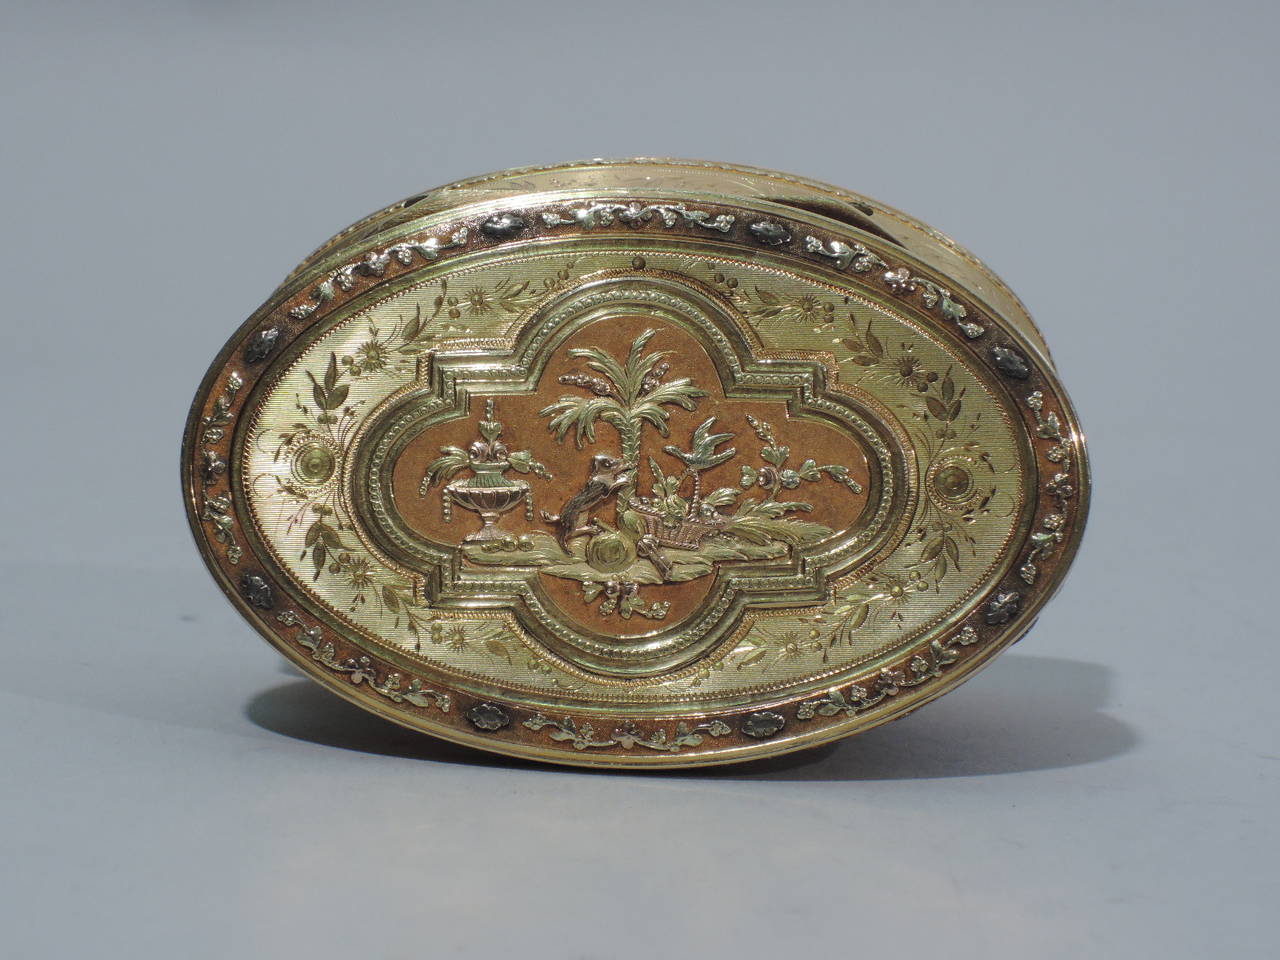 19th Century Swiss Gold Snuffbox, Neoclassical with Grecian Lamp Vase, circa 1810